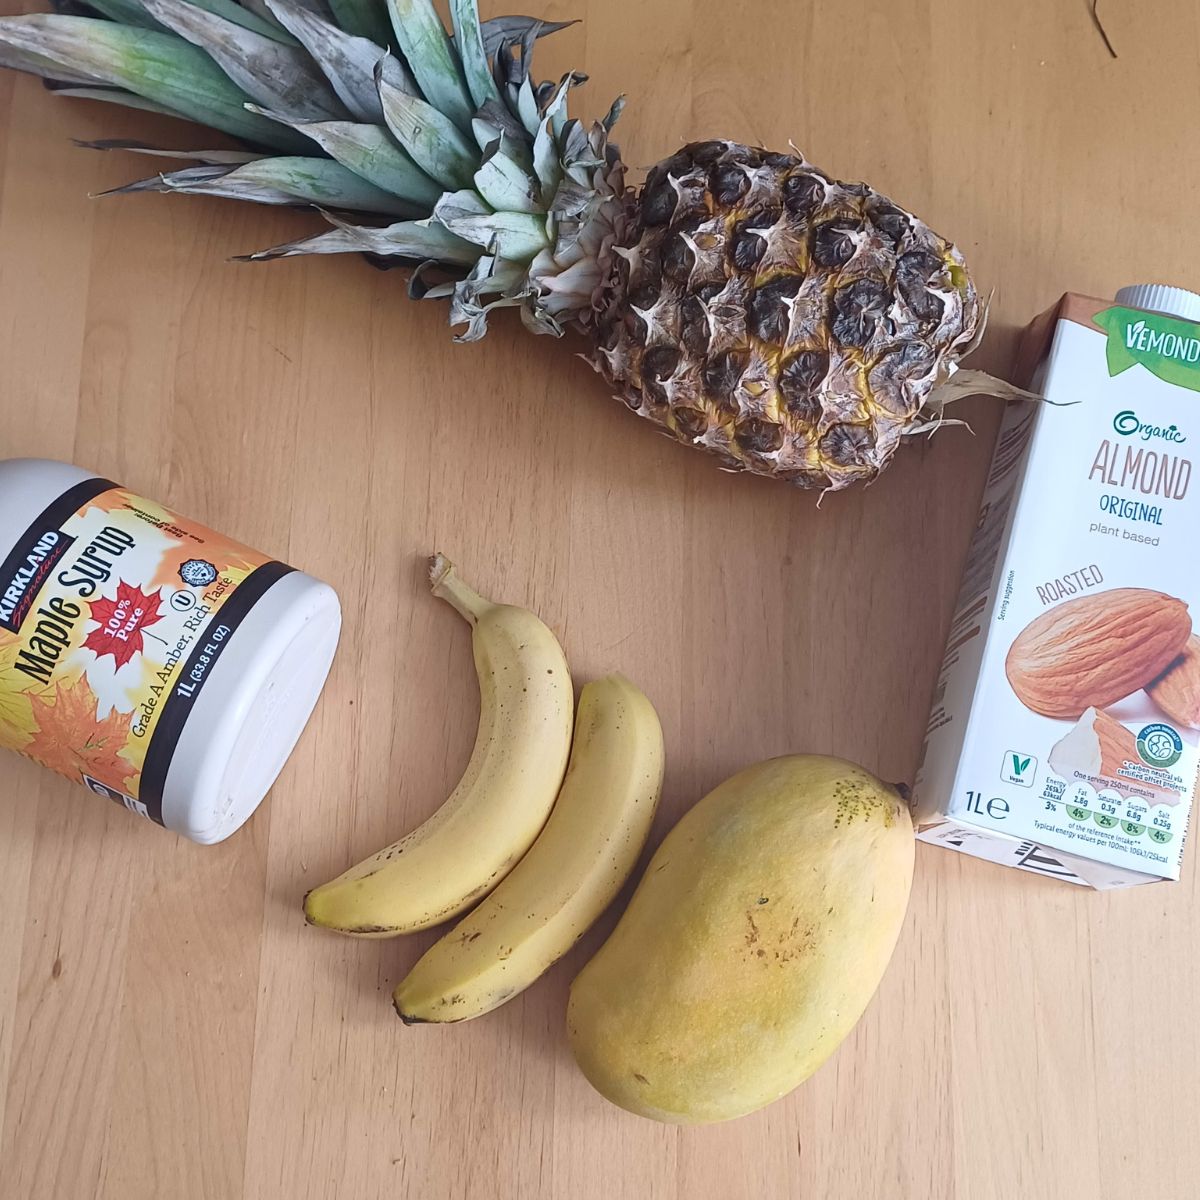 pineapple, banana, mango, almond milk and maple syrup placed on wooden table.